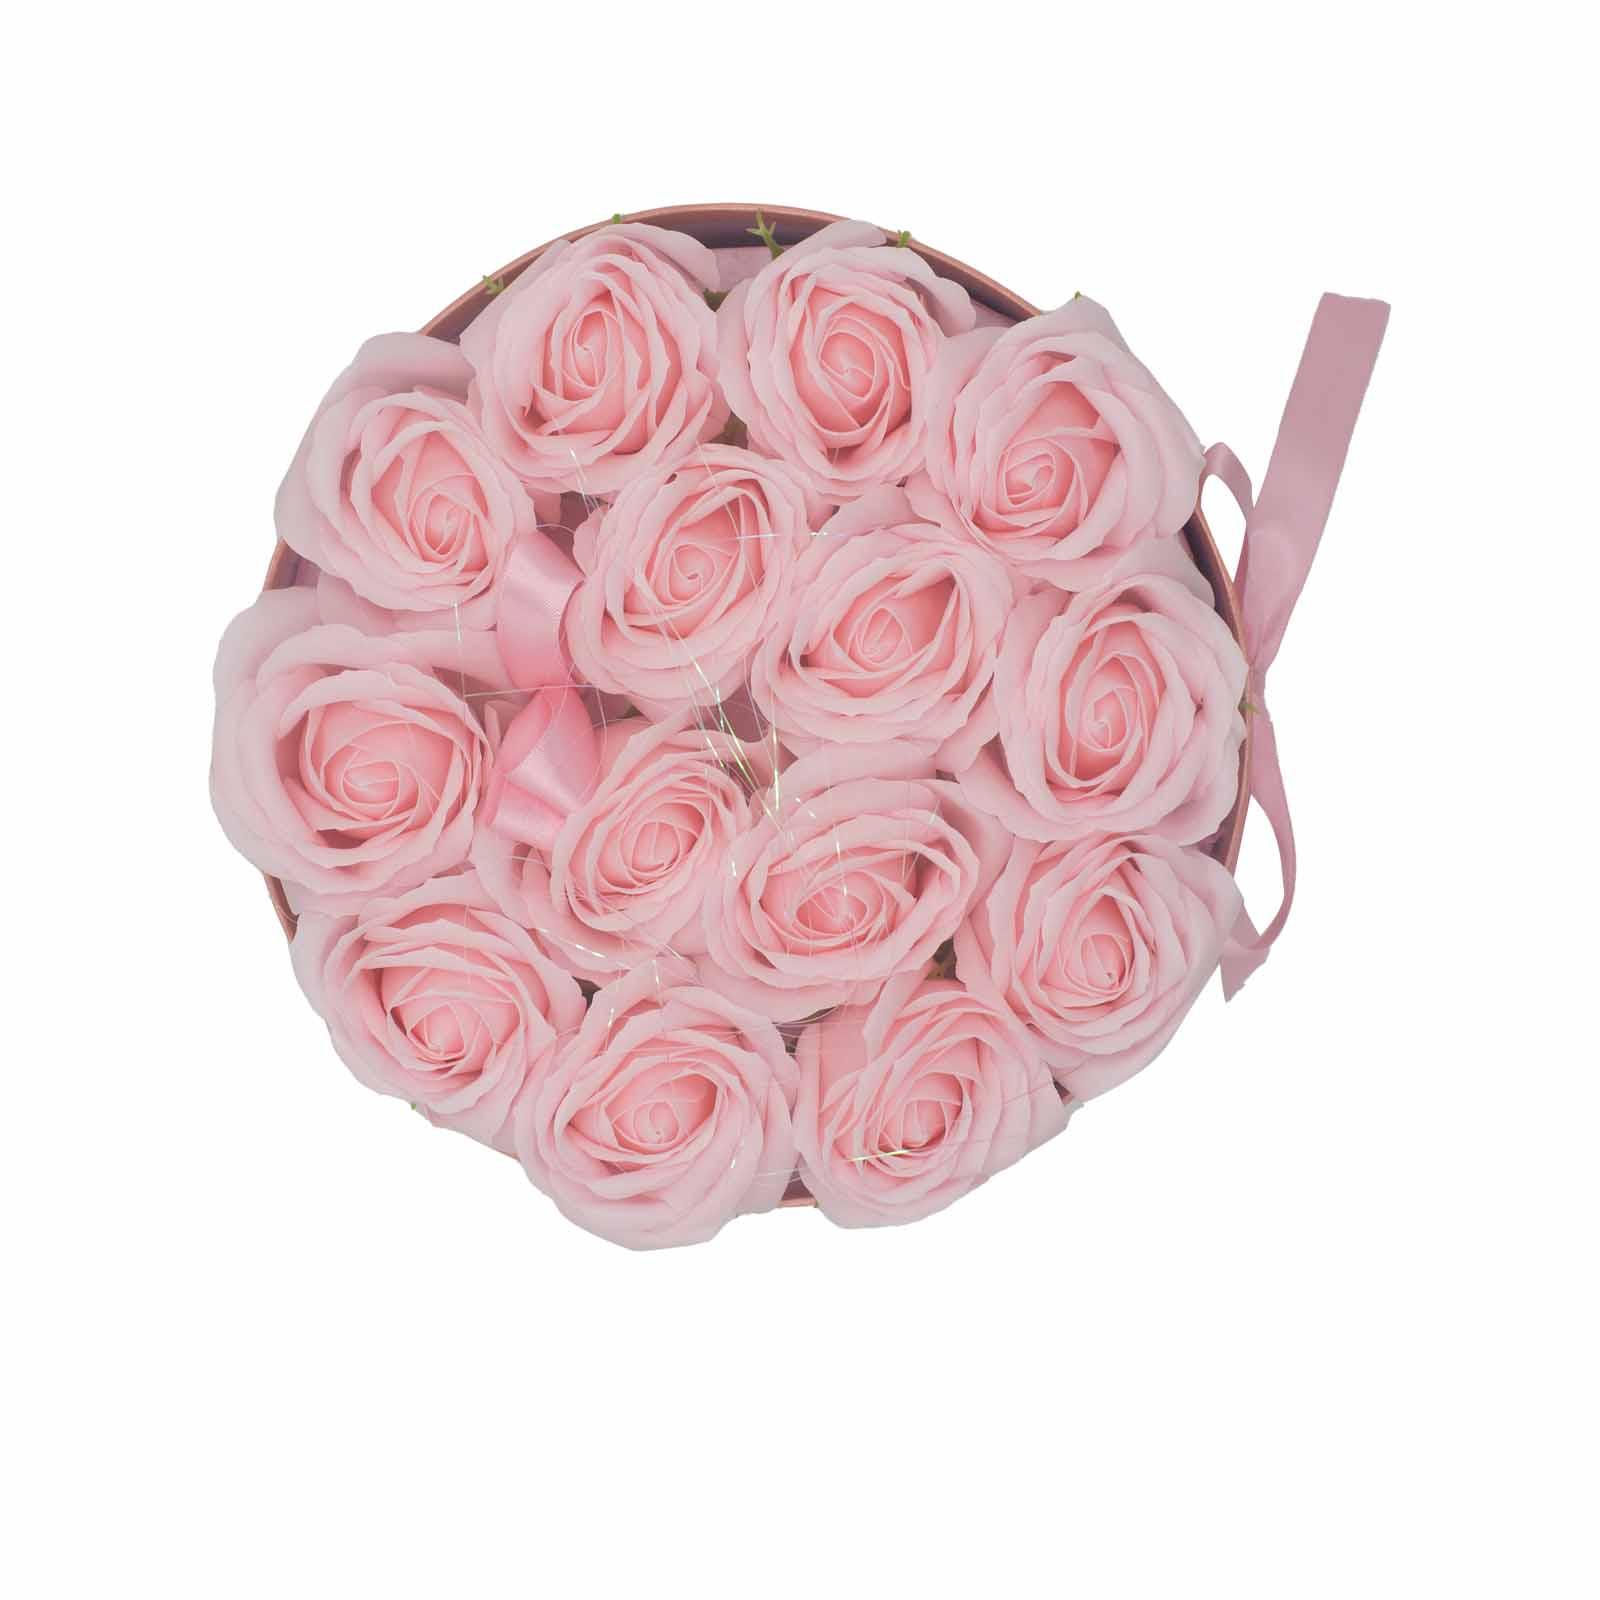 Soap Flower Gift Bouquet - 14 Pink Roses - Round - Charming Spaces